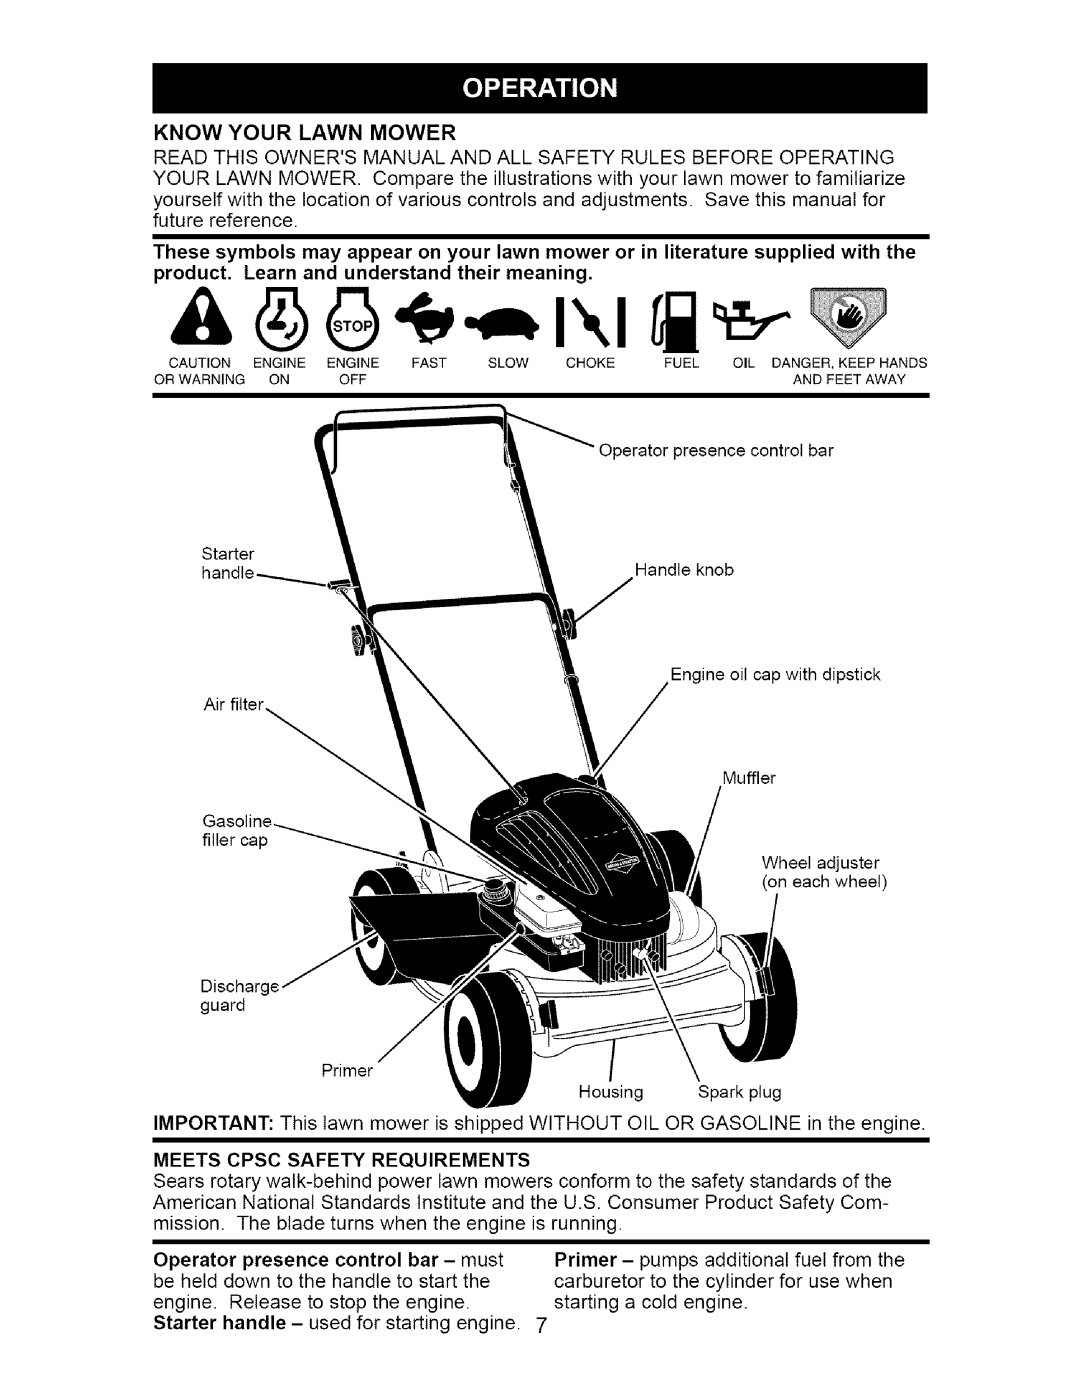 Craftsman 917.37134 Know Your Lawn Mower, product. Learn and understand their meaning, Meets Cpsc Safety Requirements 